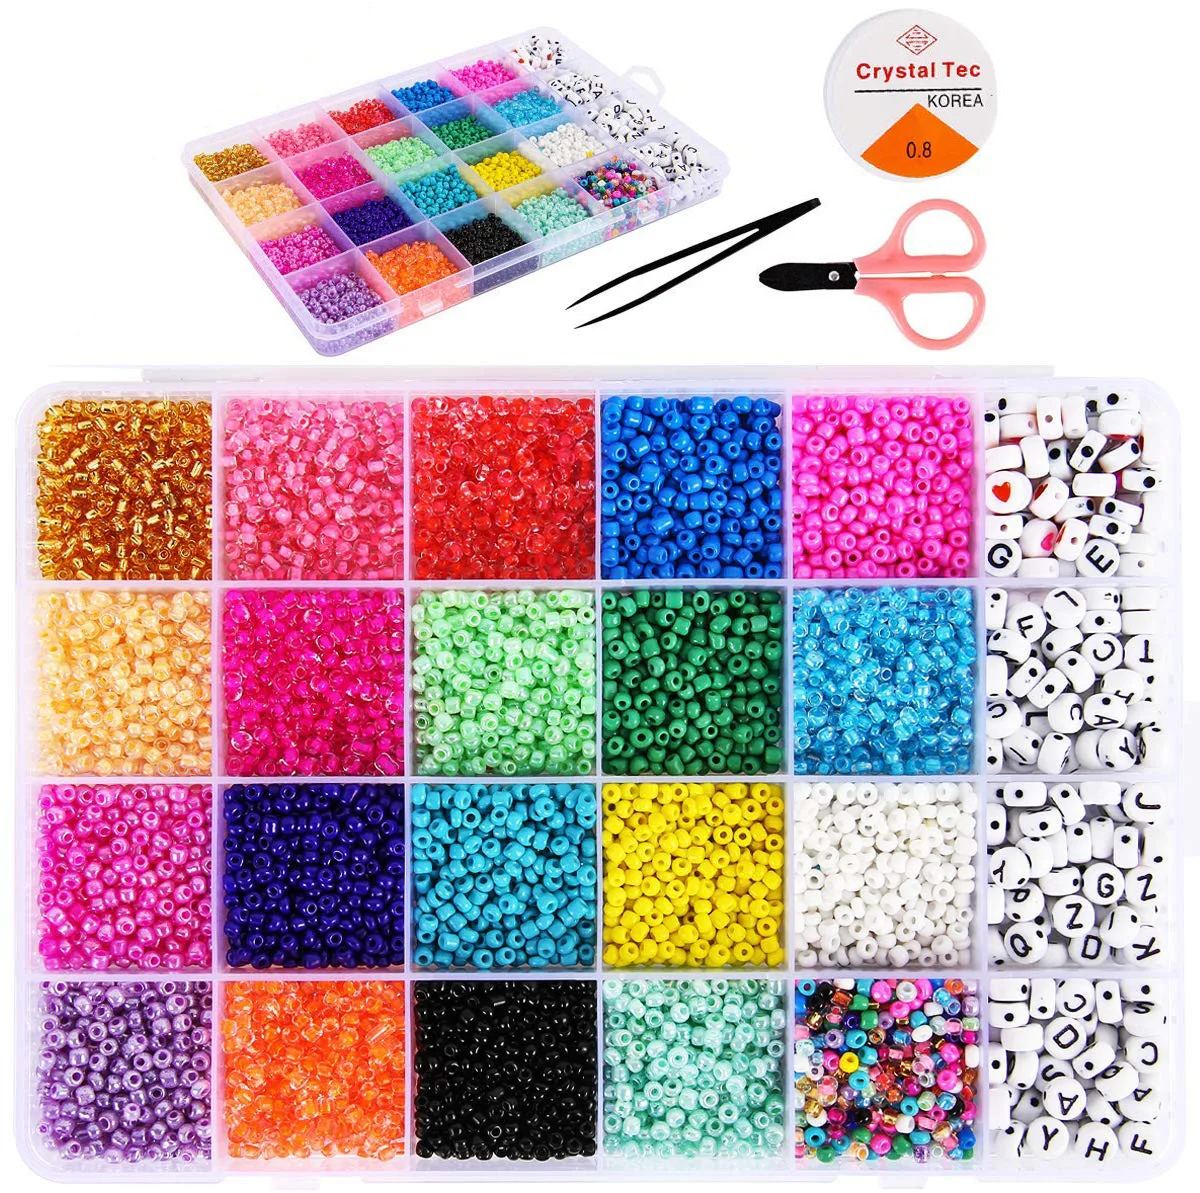 

Amazon Hot Sale Glass Seed and Alphabet Letter Beads, String, and Charms - Arts and Crafts DIY Bracelet Making Kit, Colorful